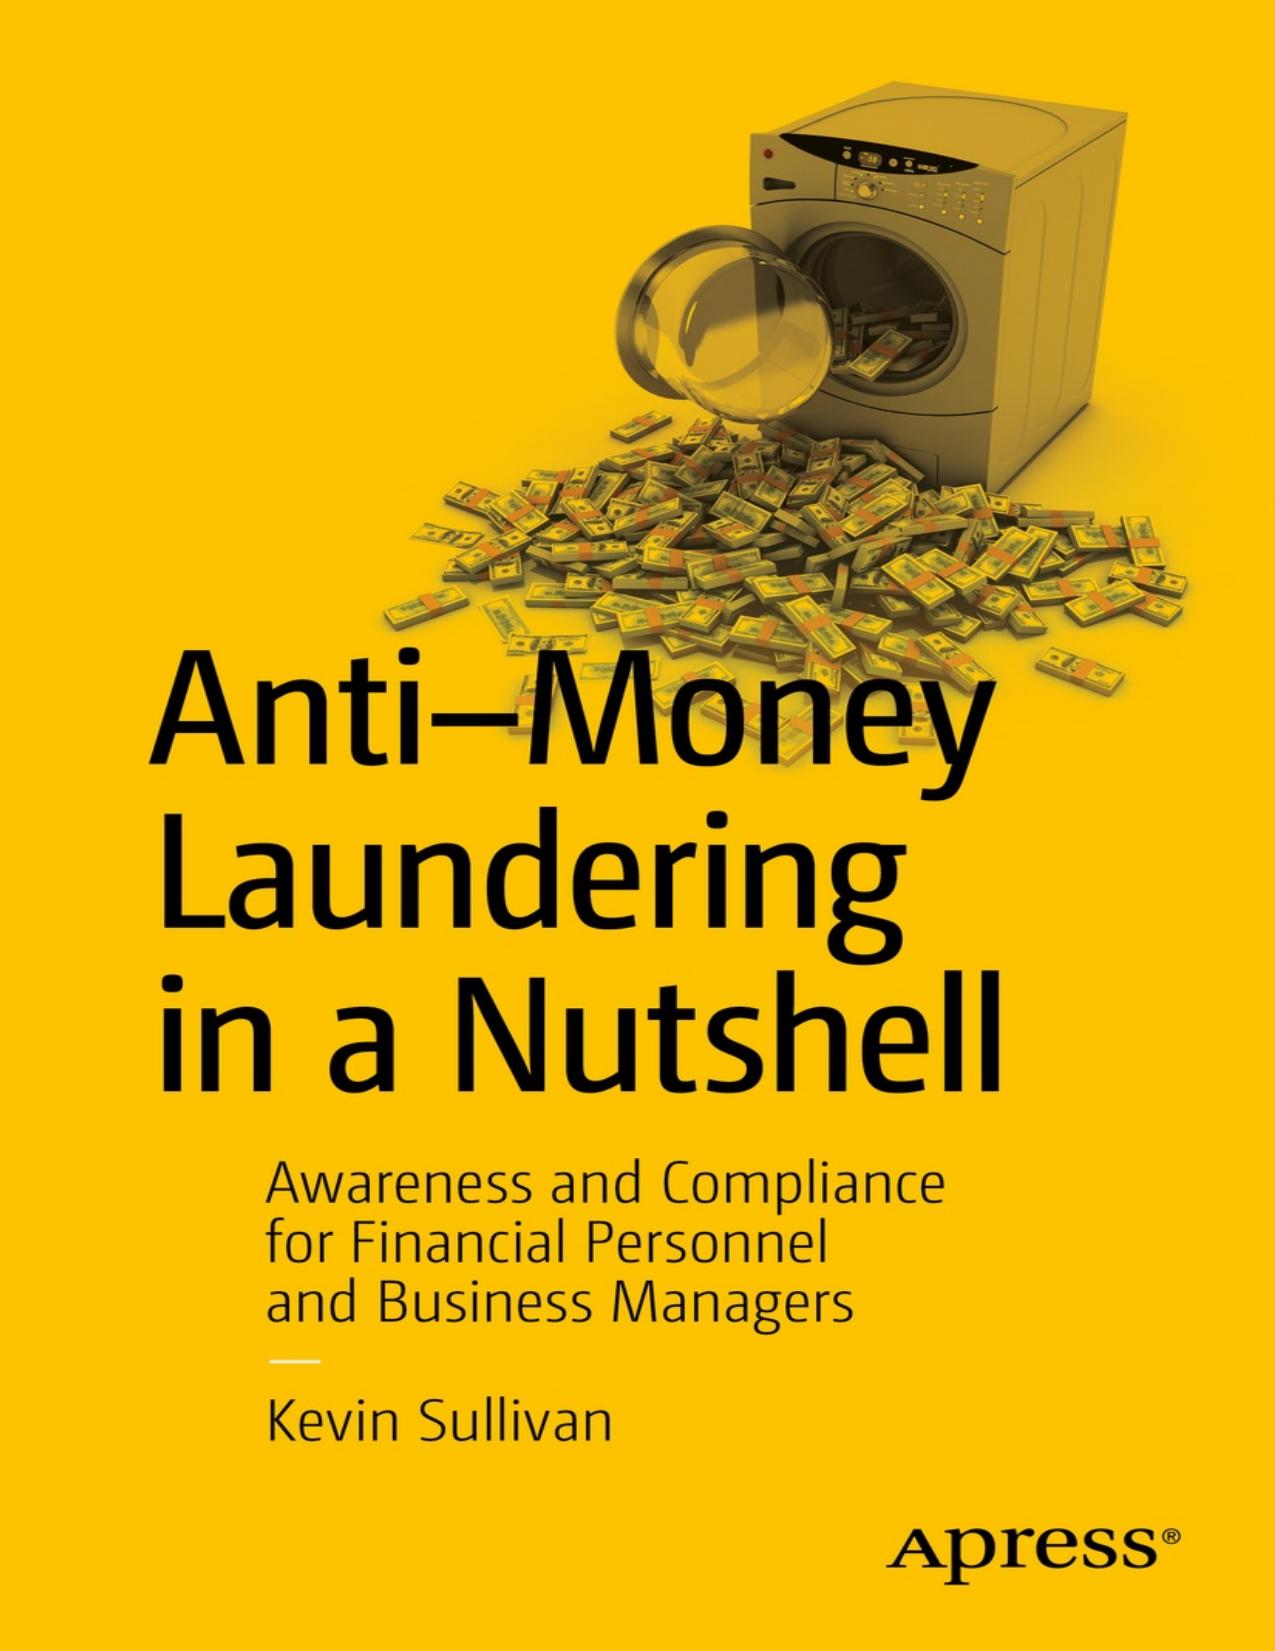 Anti-Money Laundering in a Nutshell: Awareness and Compliance for Financial Personnel and Business Managers - PDFDrive.com